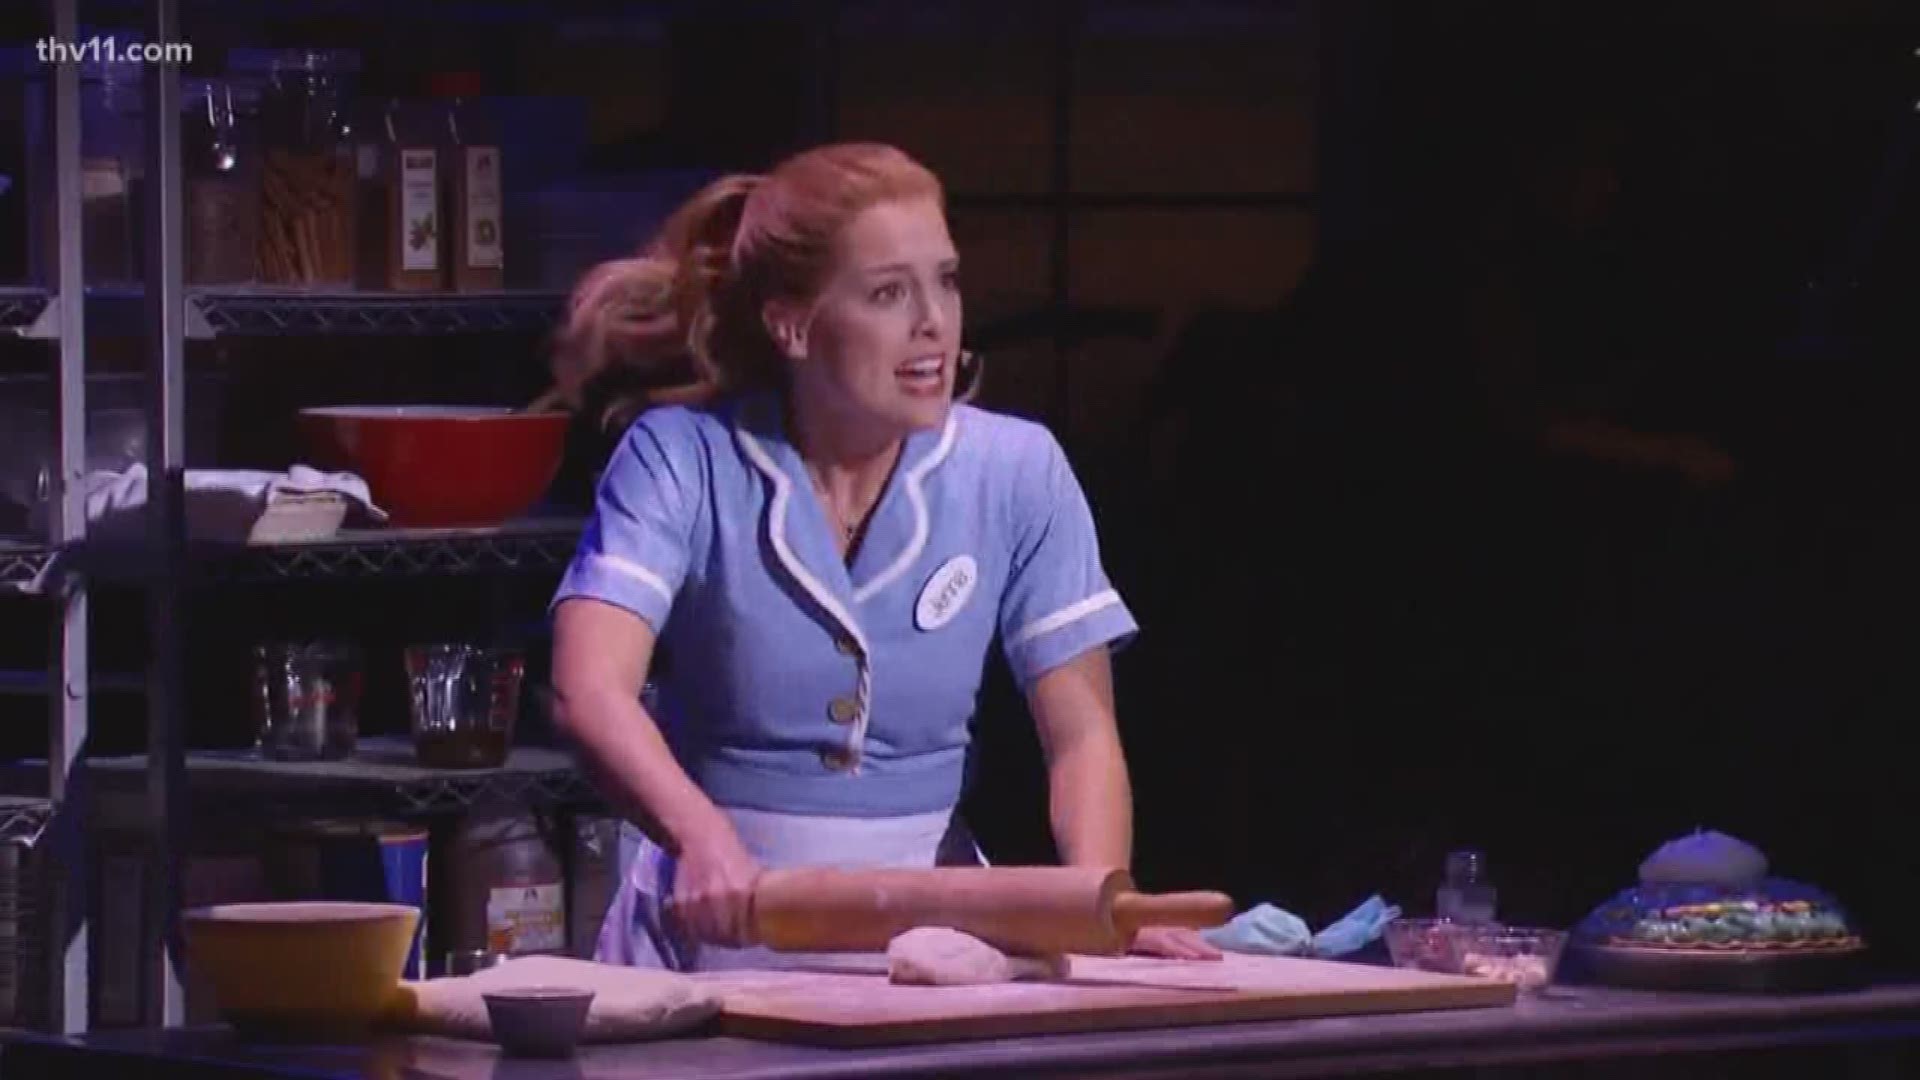 Celebrity Attractions has baked up an amazing Broadway season for us,  including Waitress & Stomp.